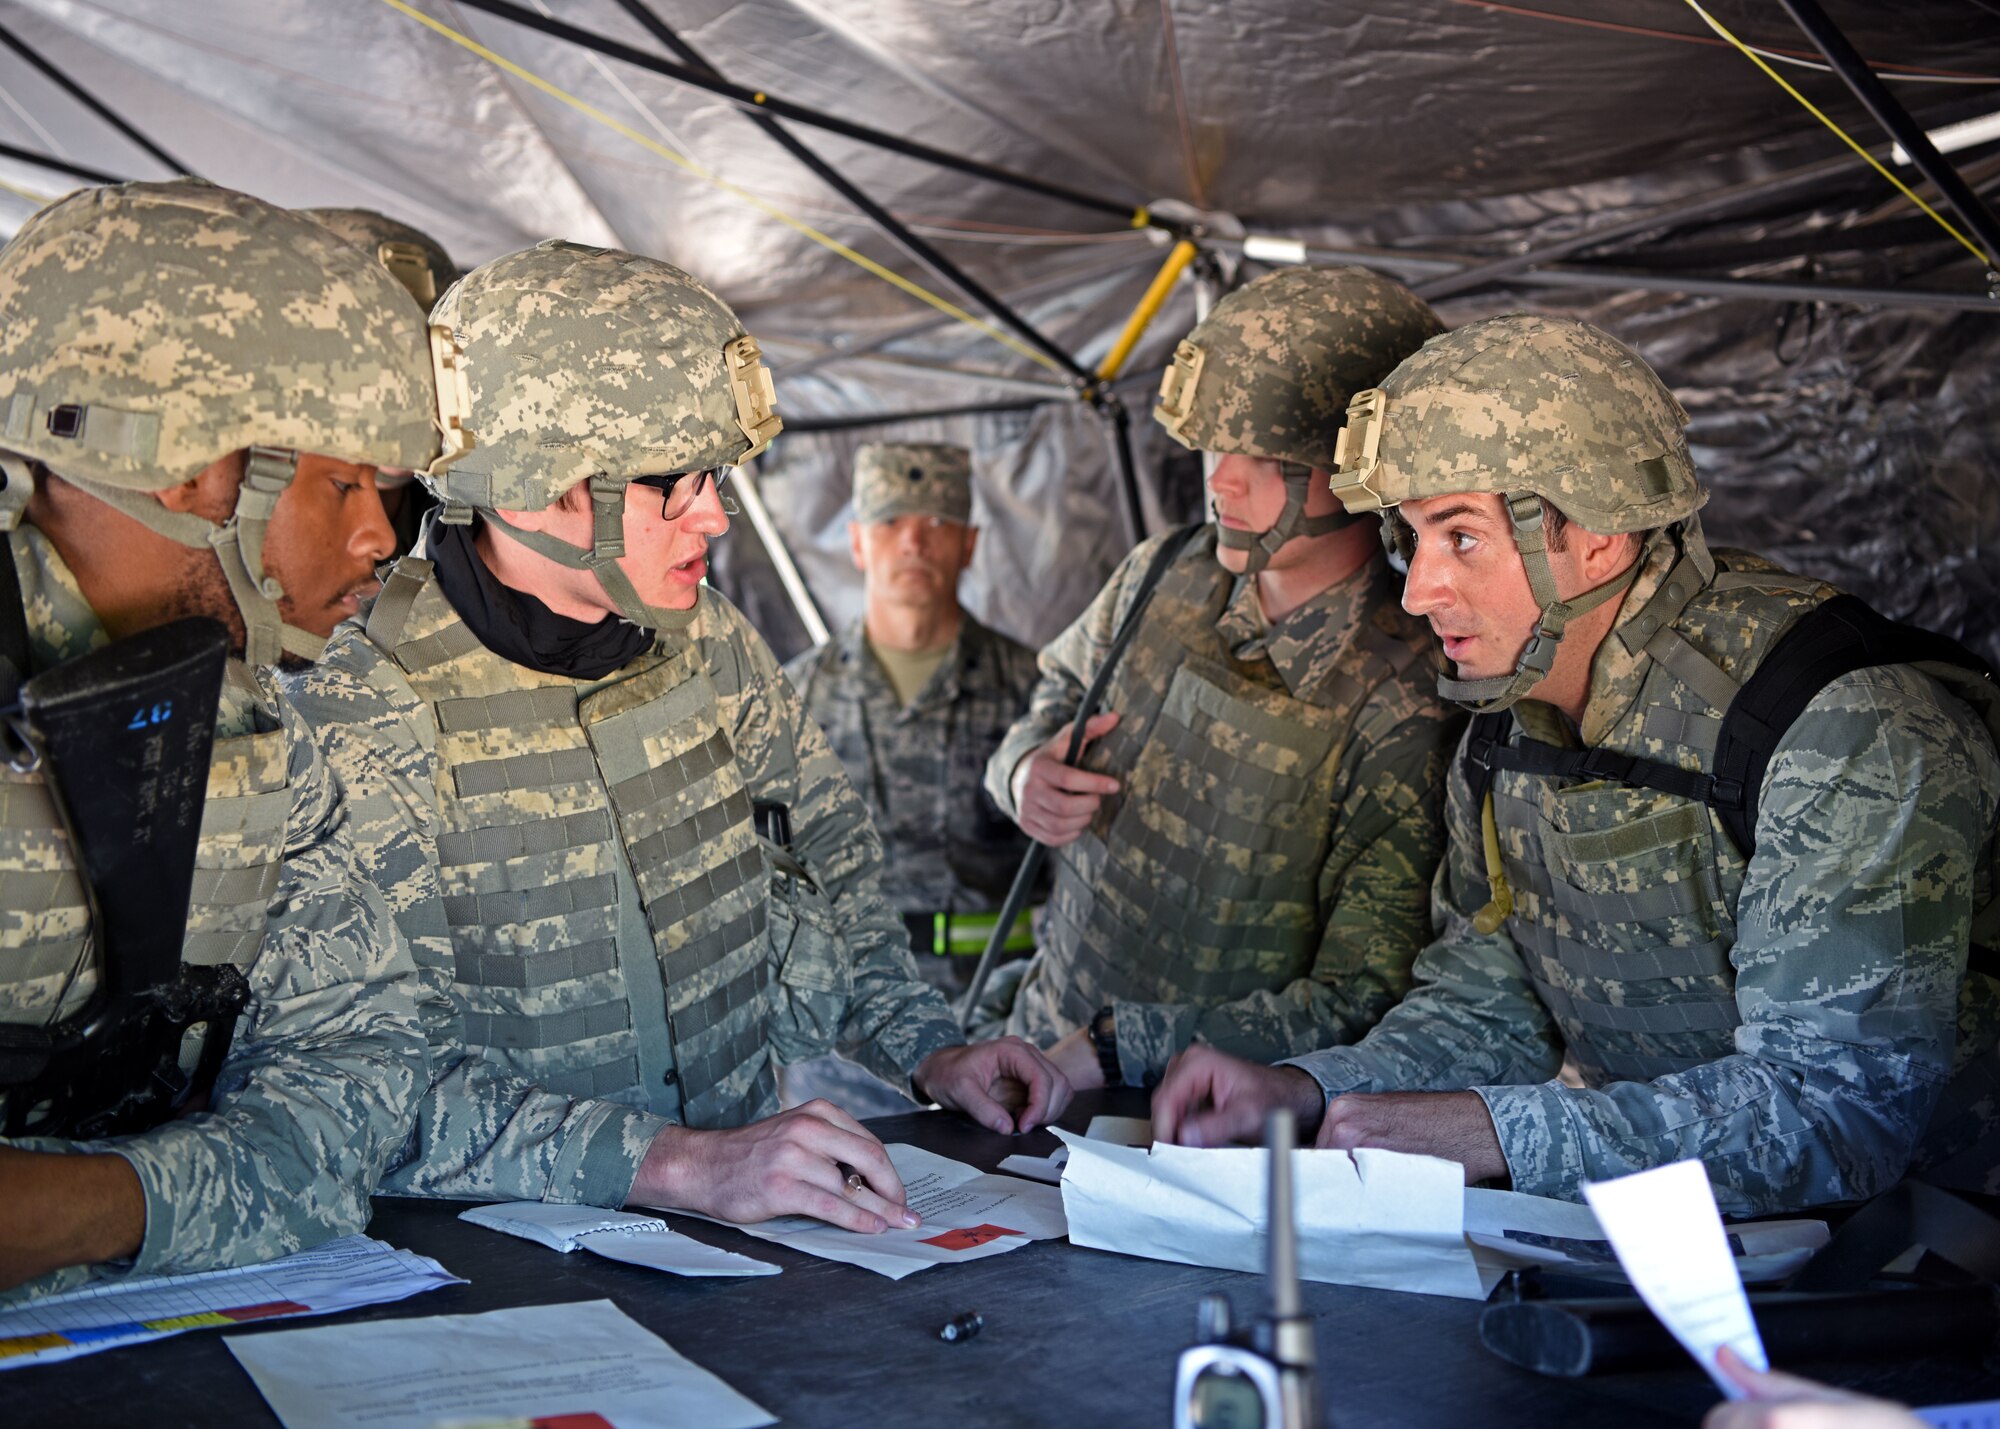 Angelo State University Air Force ROTC Cadets plan their next mission with the leaders of each fire team during their field training exercise at Goodfellow Air Force Base, Texas, April, 25, 2019. Cadets are taught many valuable lessons to prepare them for future leadership positions. (U.S. Air Force Airman 1st Class Ethan Sherwood/Released)